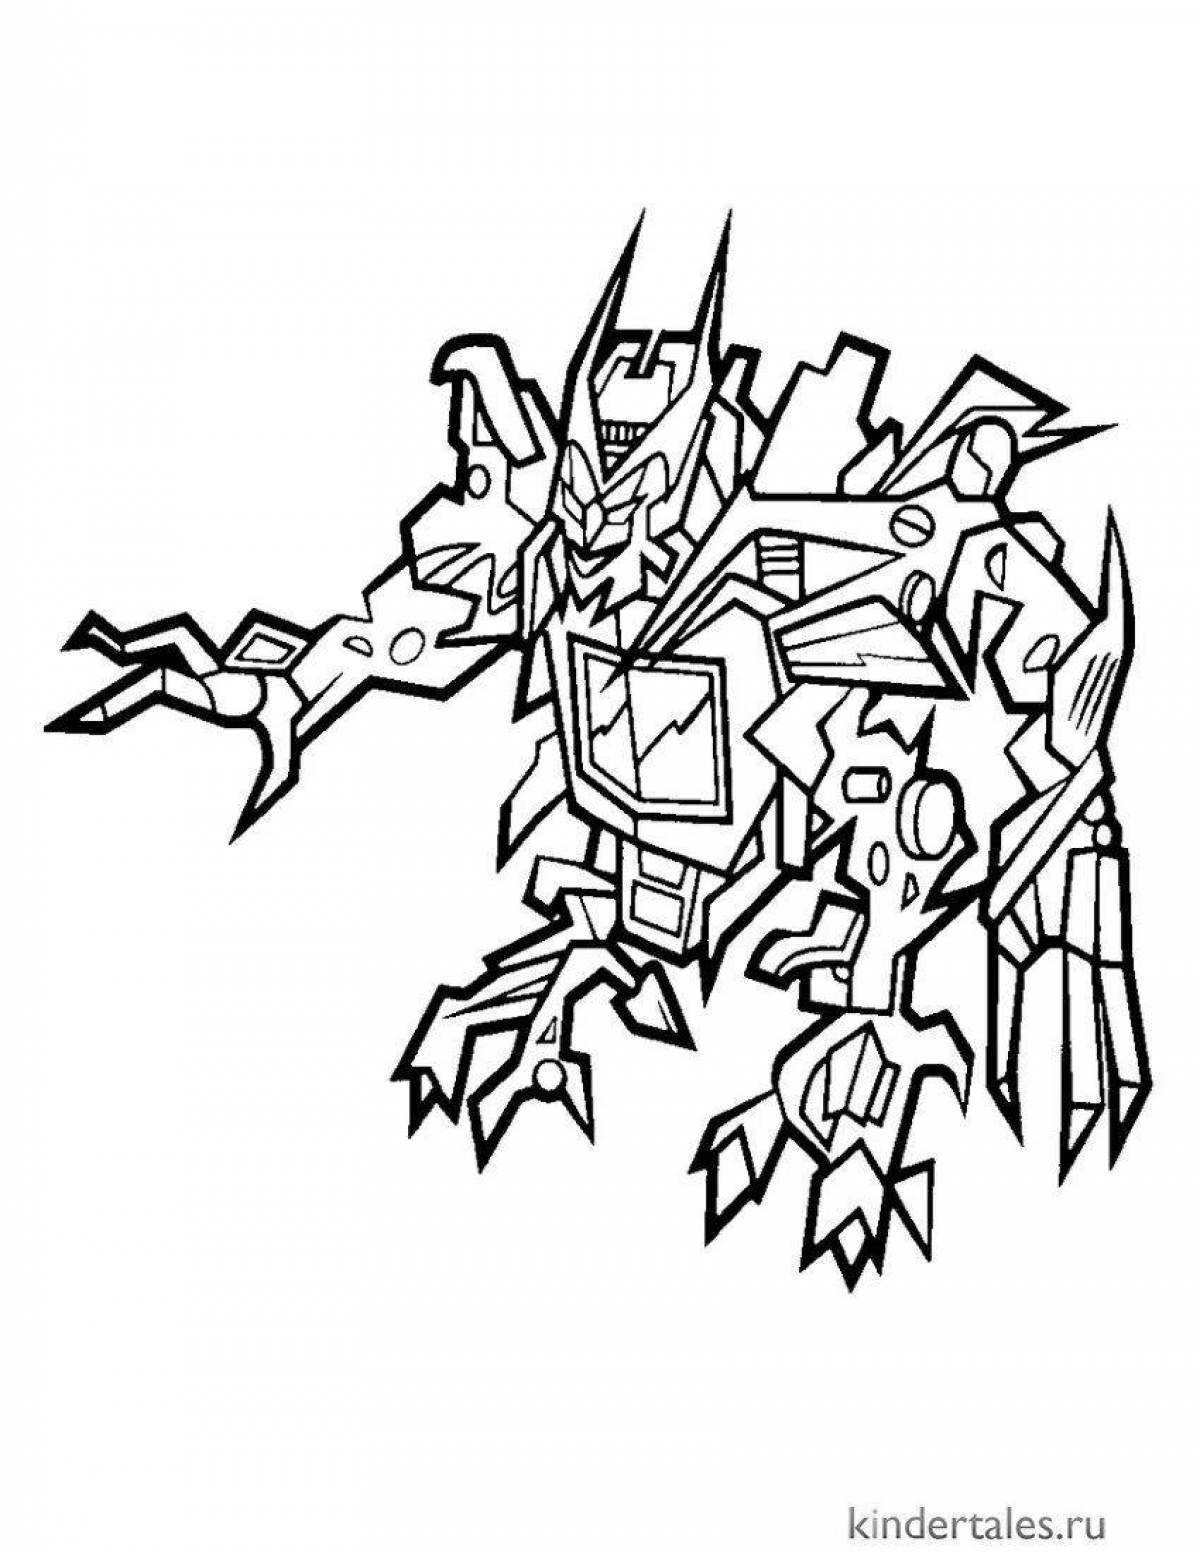 Deluxe megatron coloring page